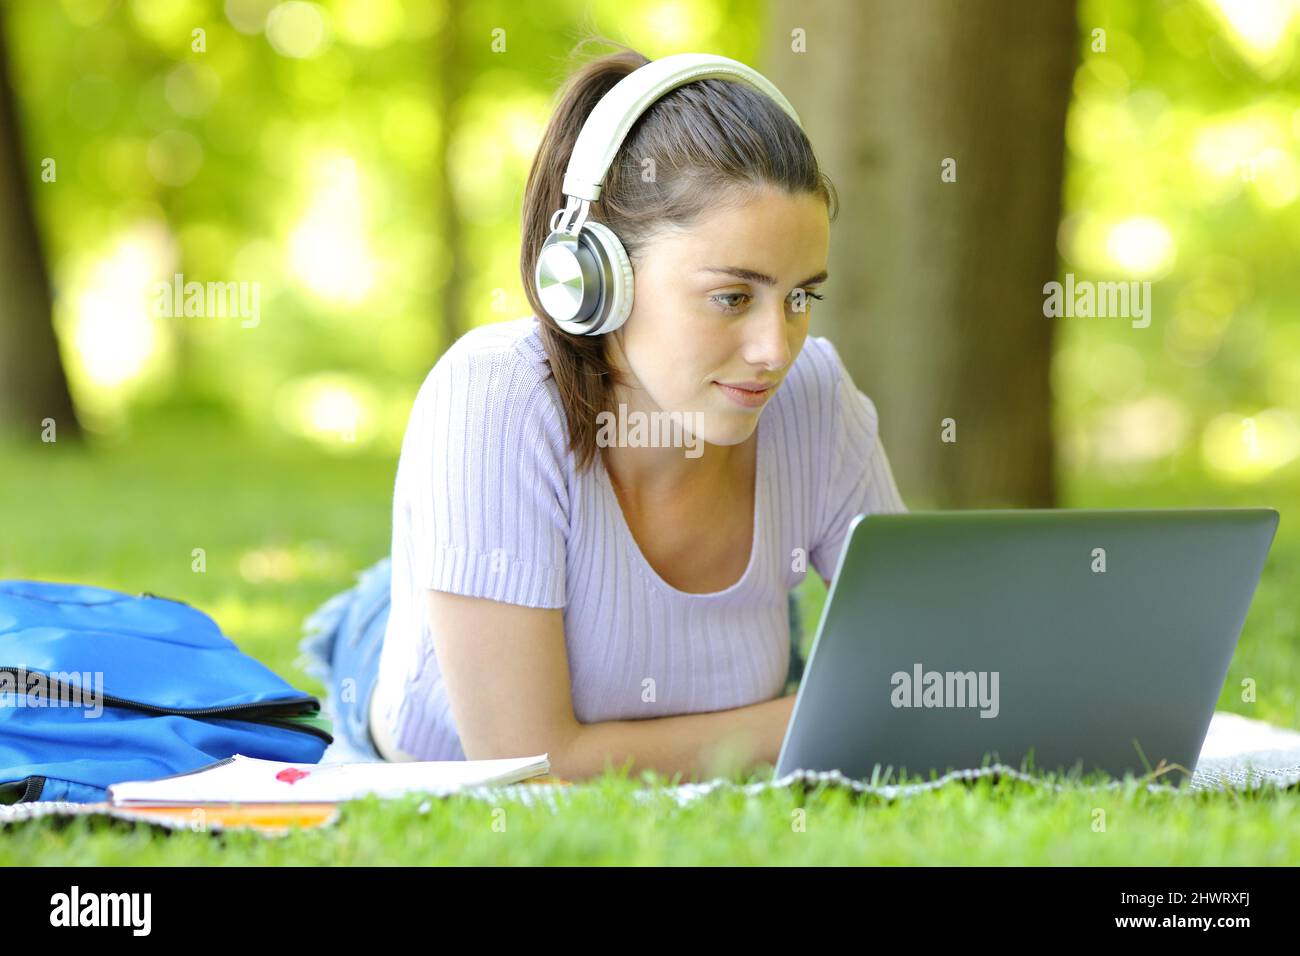 Woman e-learning online using laptop and headphones lying on grass in a park in a campus Stock Photo